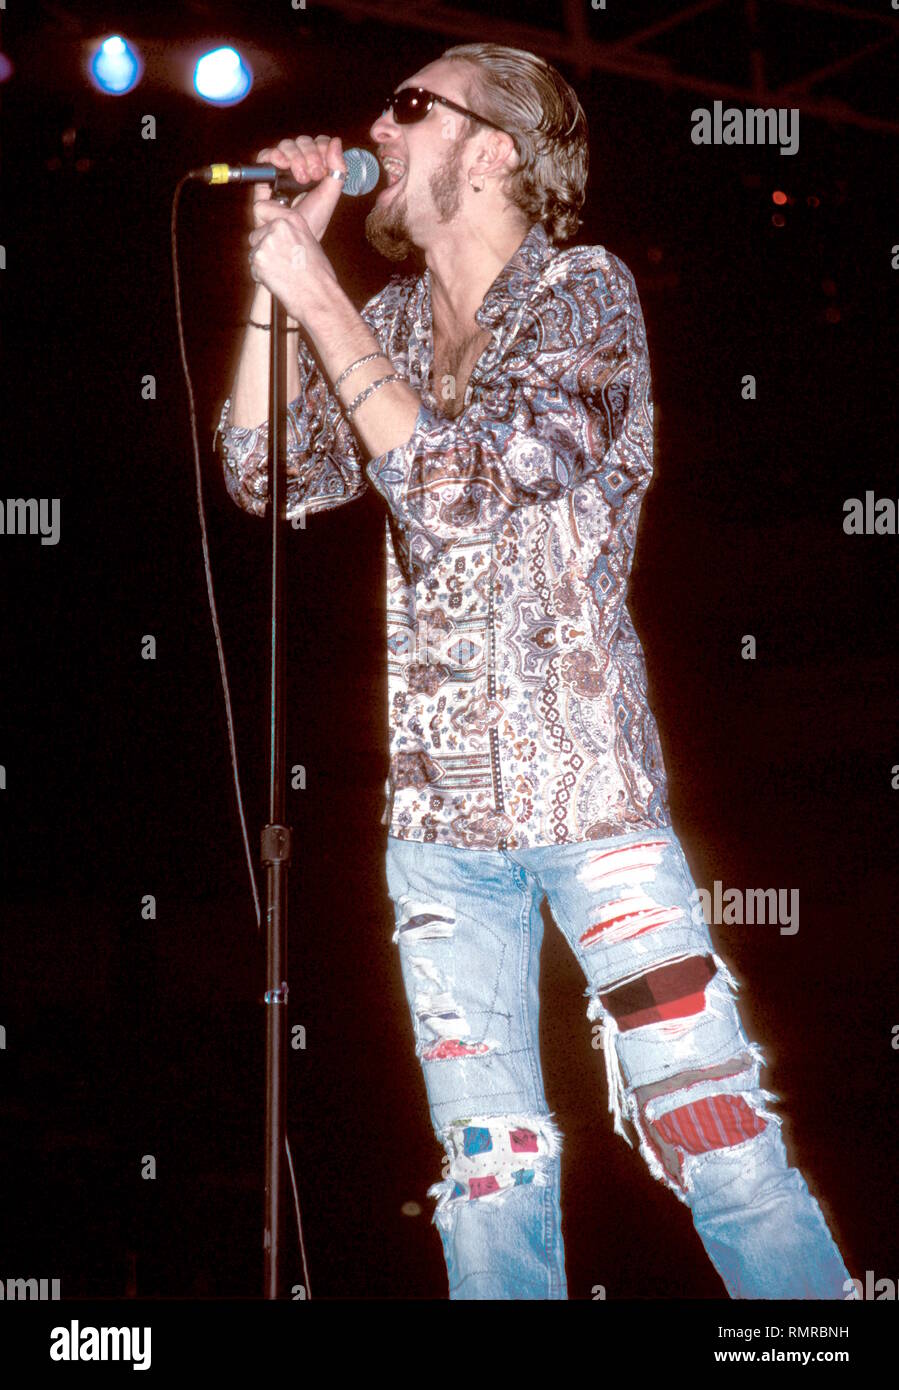 Alice In Chains vocalist Layne Staley is shown performing 'live' in concert. Stock Photo